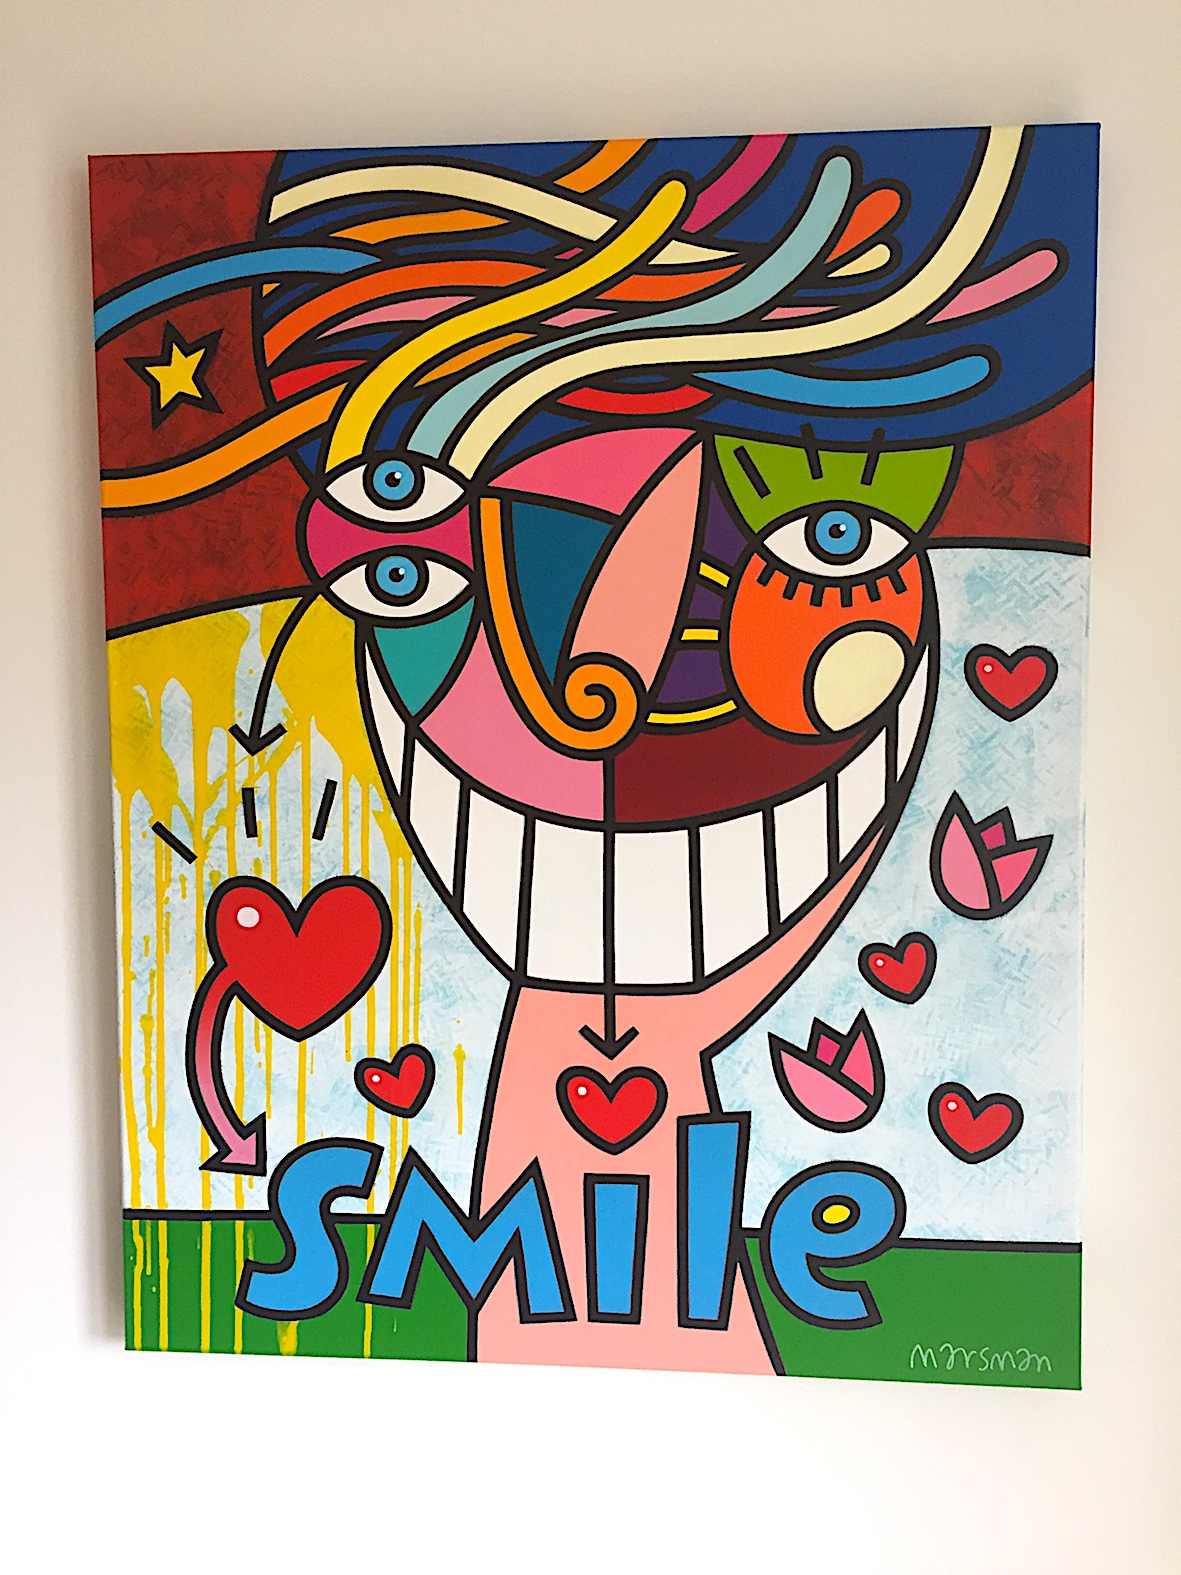 <b>SMILE</b> - 80 x 100 cm - acrylic on canvas - SOLD  <a style="color: red; text-decoration: none" href="mailto:jpgpmarsman@onsbrabantnet.nl">BESTEL</a>